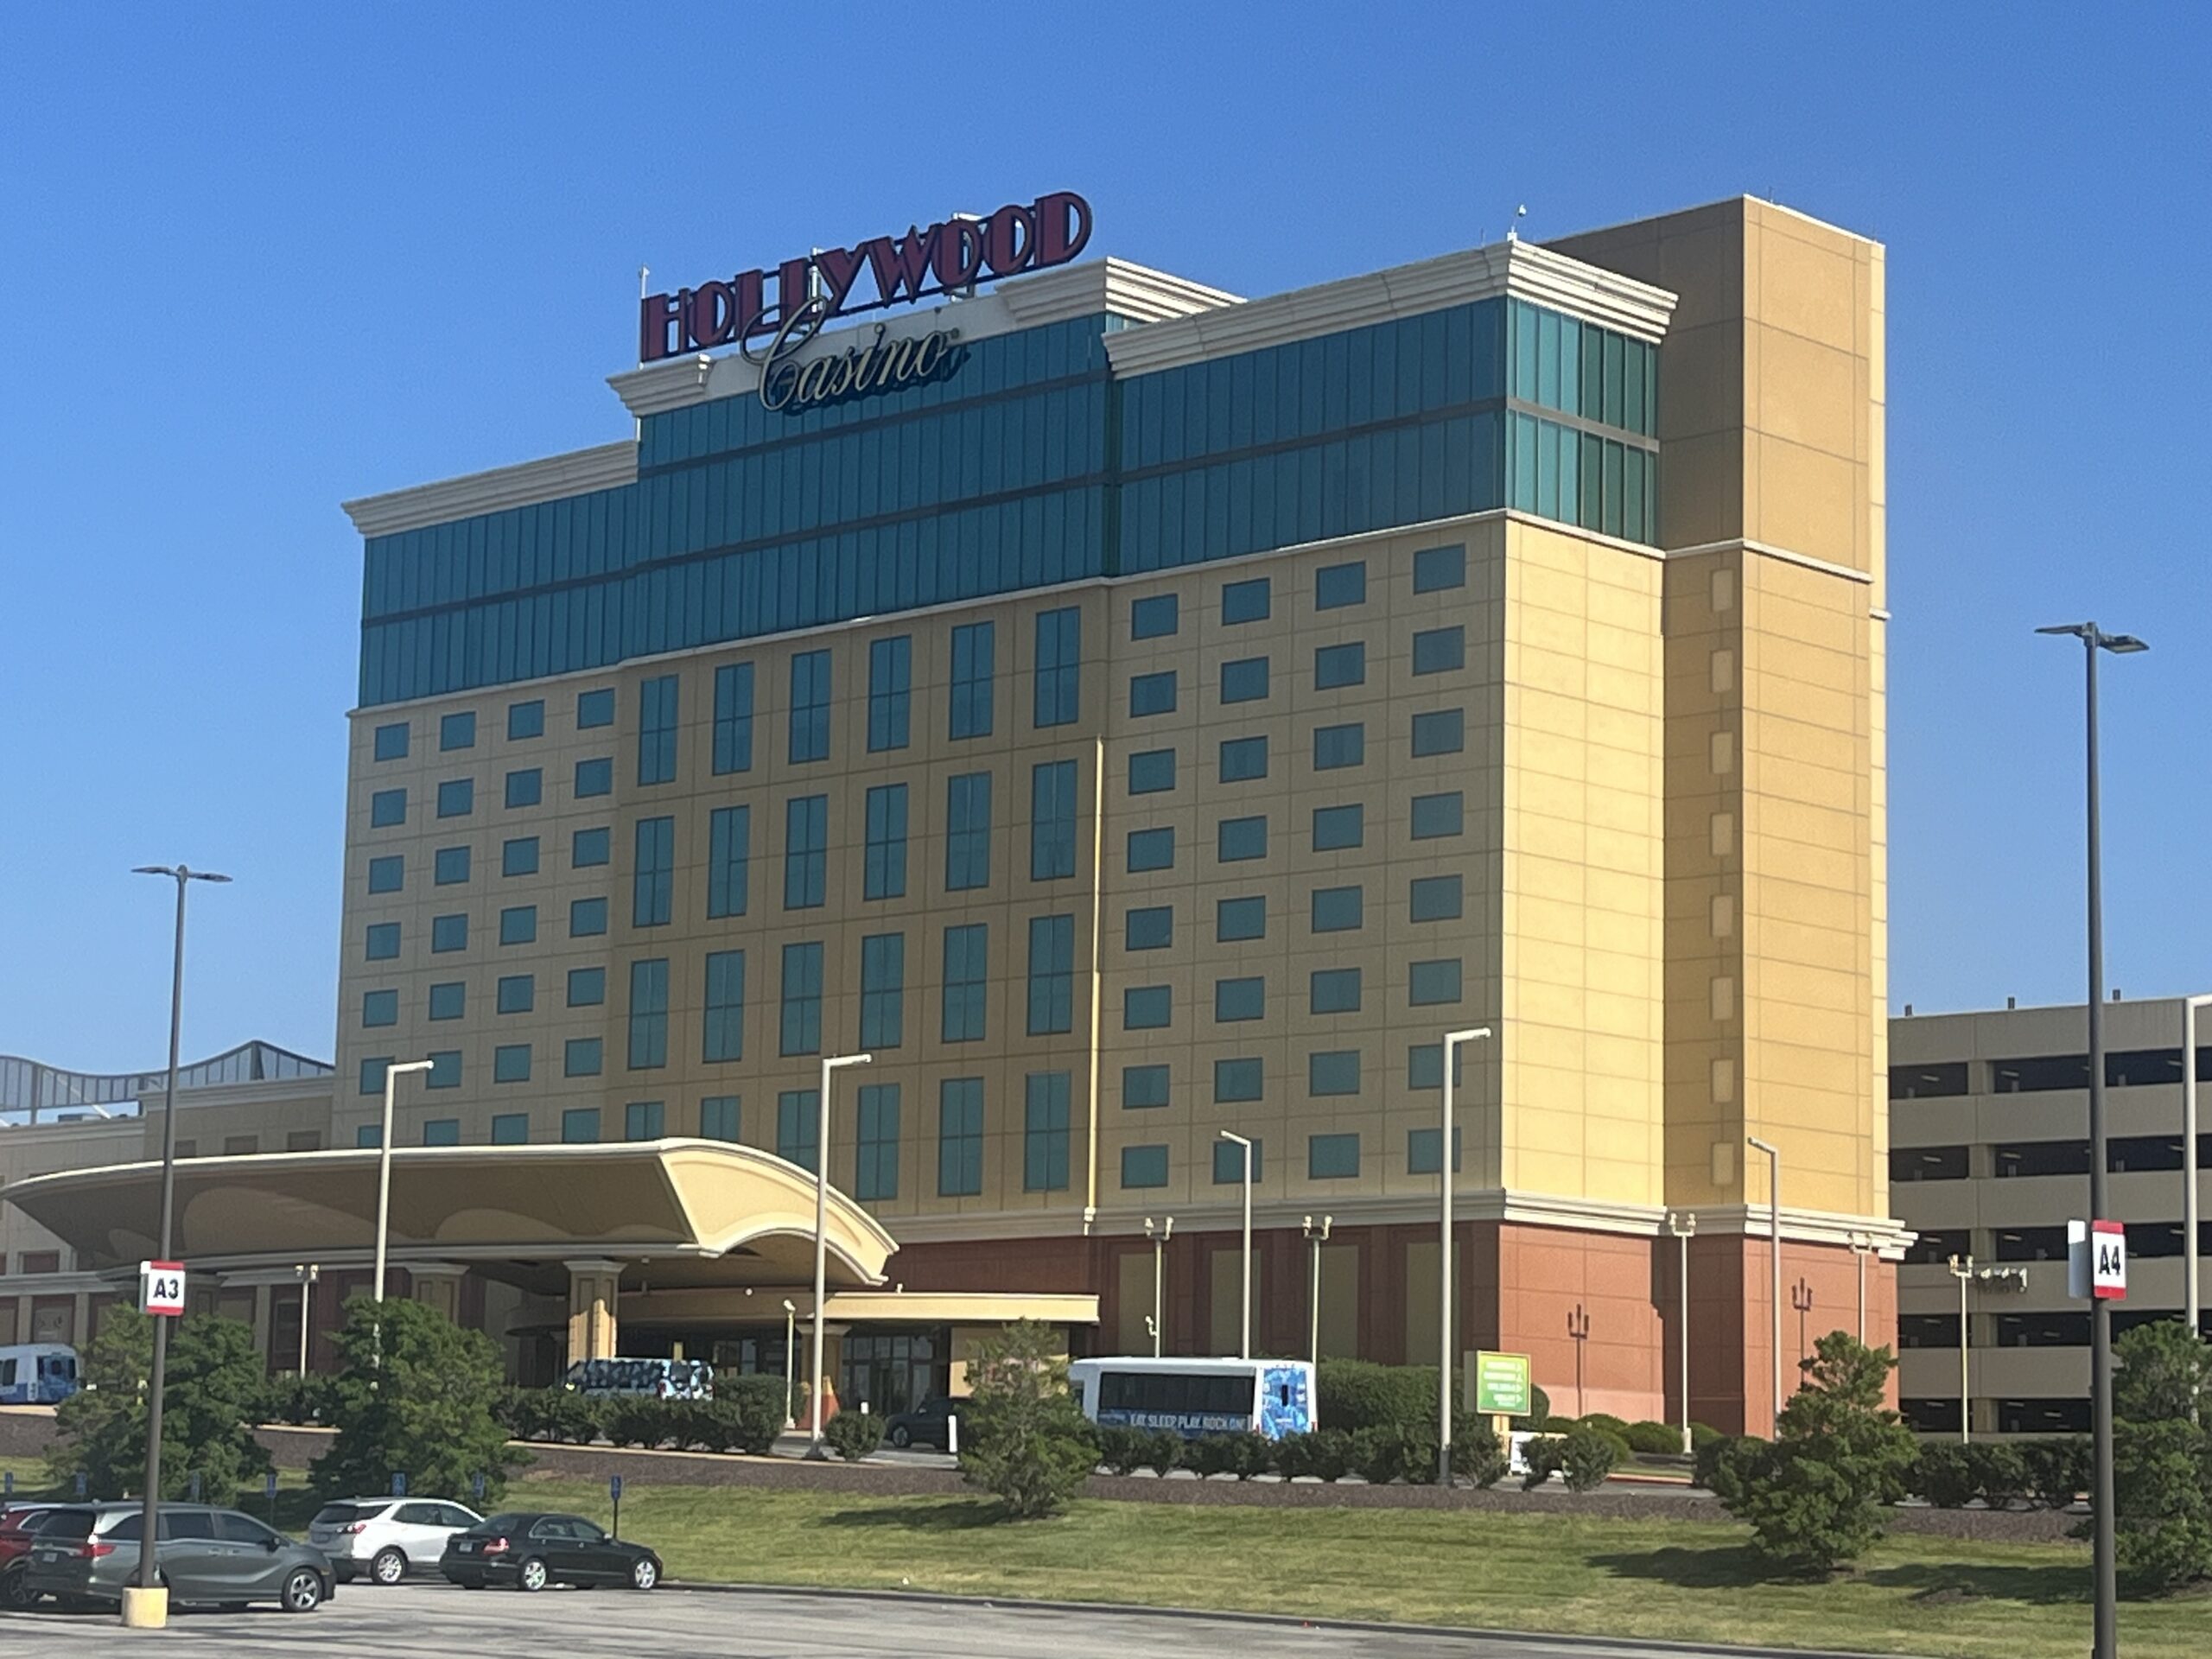 Hollywood Casino Added to Directory